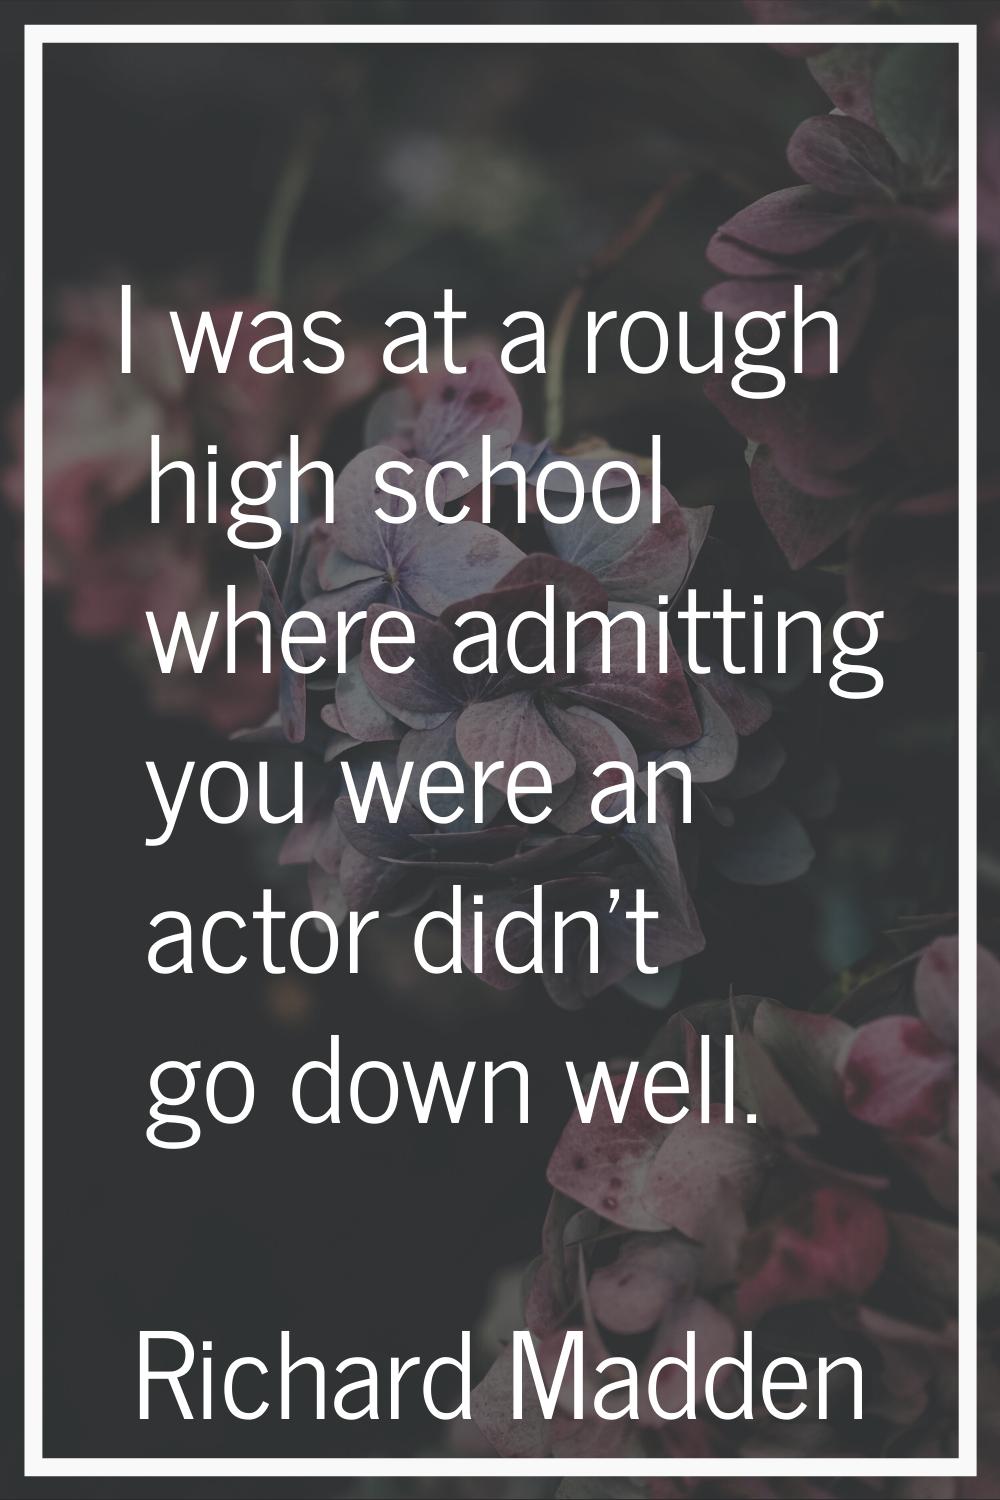 I was at a rough high school where admitting you were an actor didn't go down well.